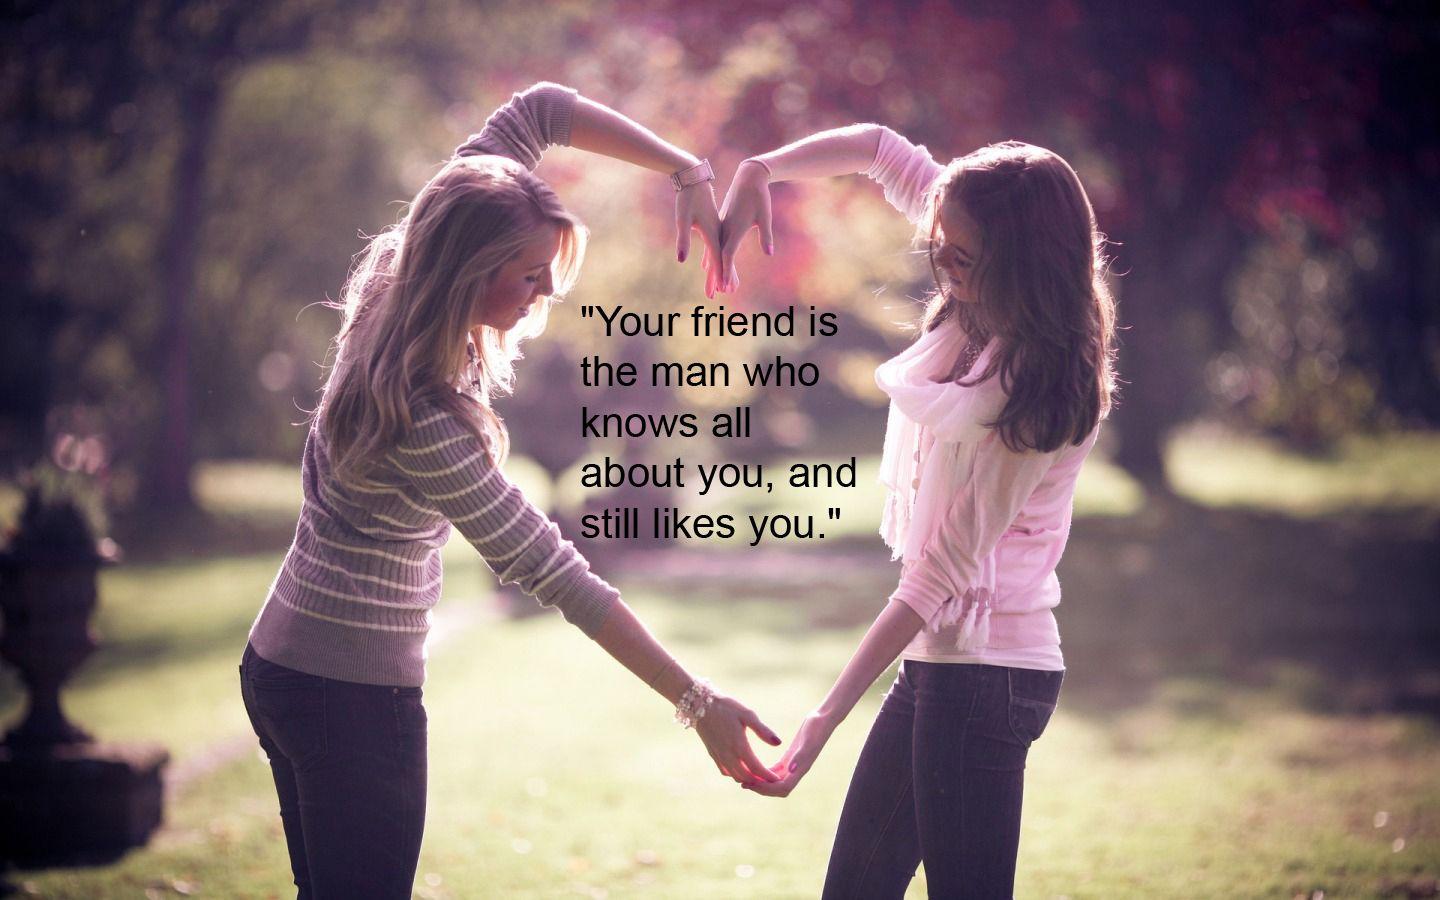 Best Friends Forever! (BFF) image Best Friend Quote HD wallpaper